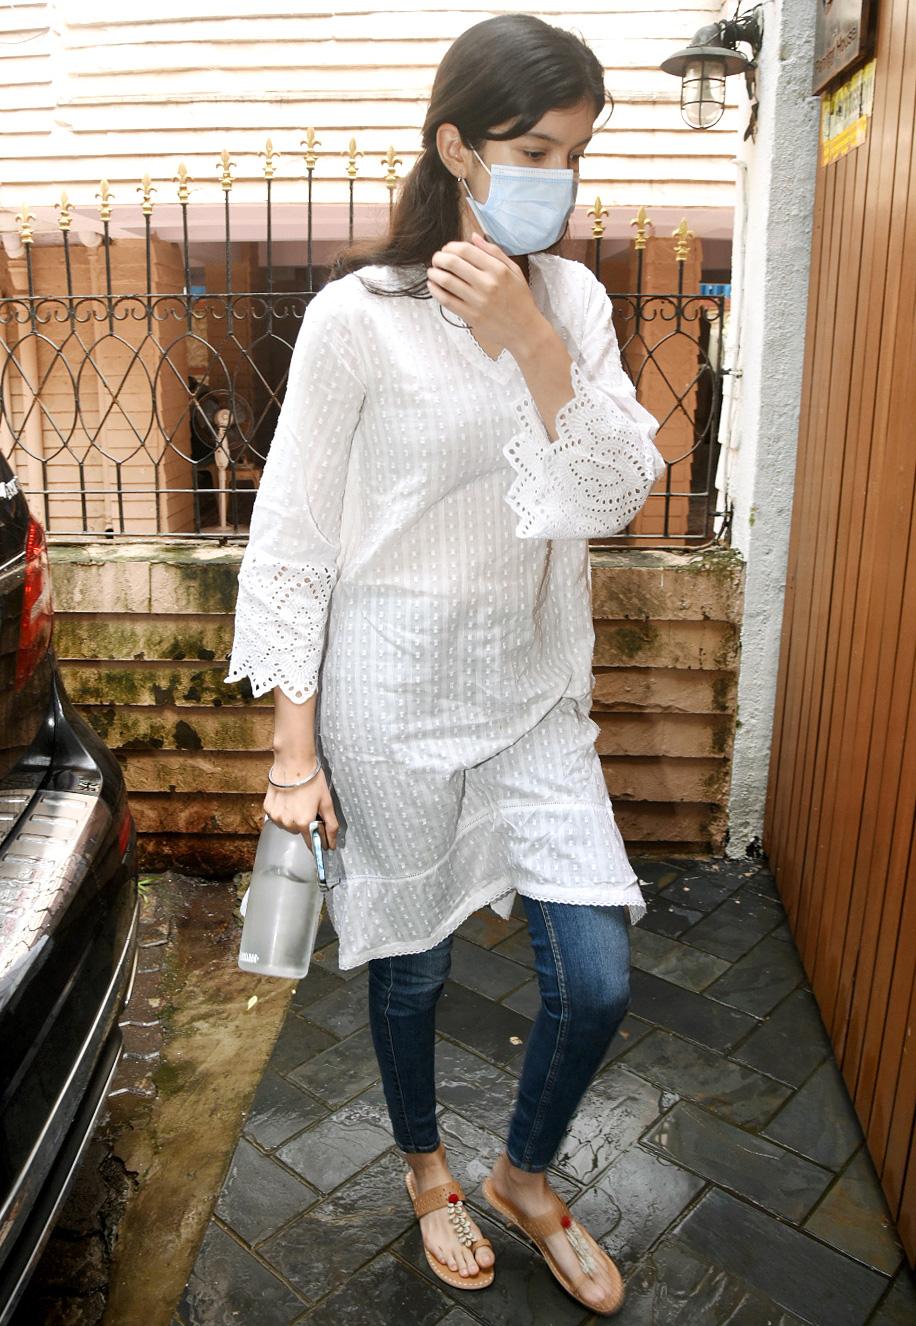 Sanjay and Maheep Kapoor's daughter Shanaya, who is friends with Ananya Panday, came in to offer her condolence to the family.